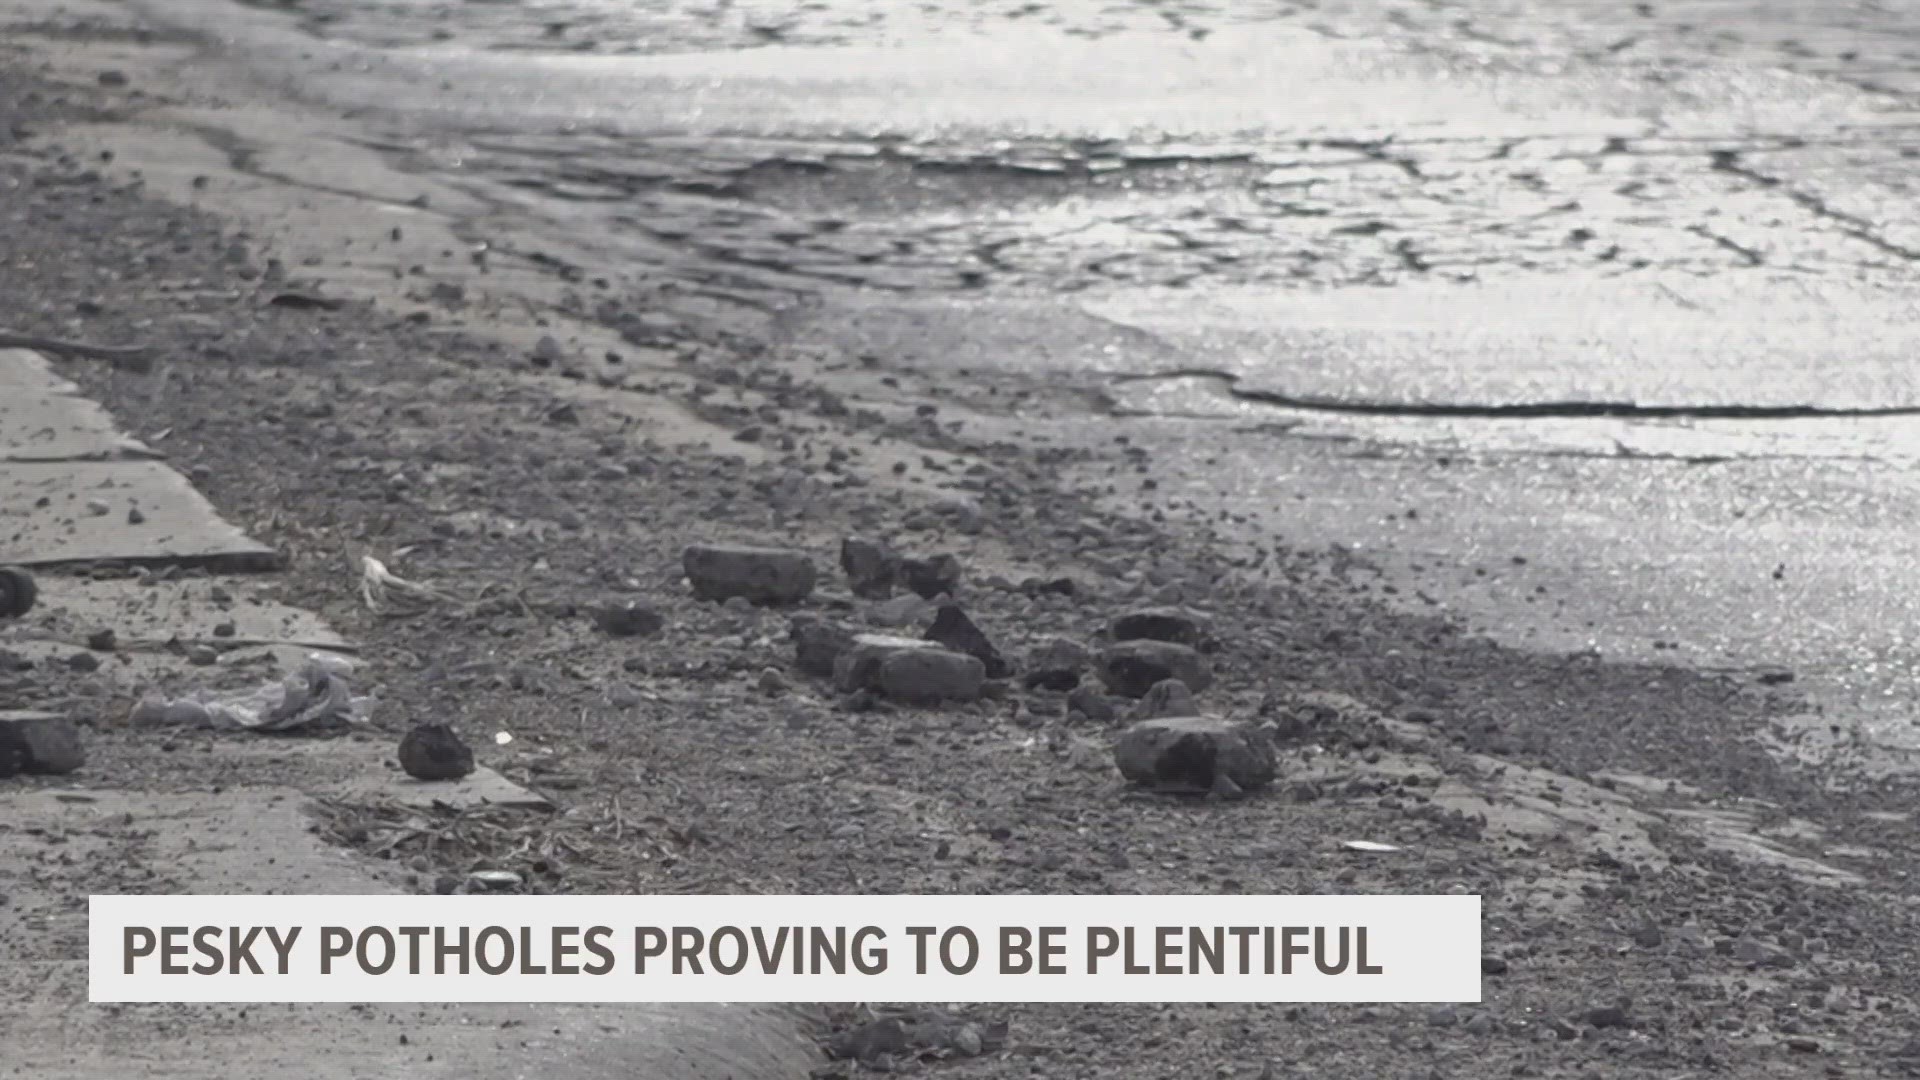 According to Jonathan Gano, director of Des Moines Public Works, last winter was "mild" in terms of pothole prevalence, with this winter getting back into gear.